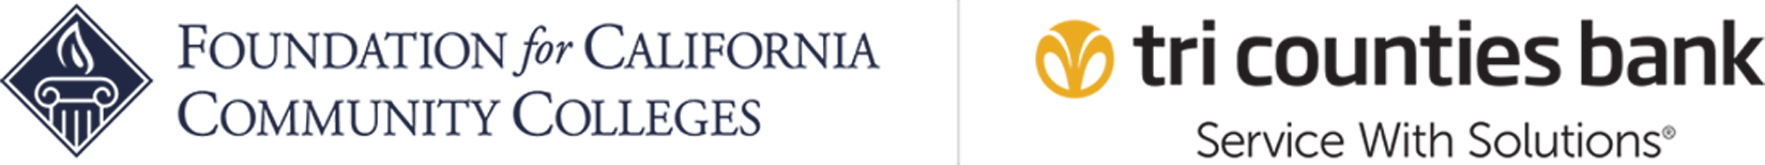 Foundation for California Community Colleges logo